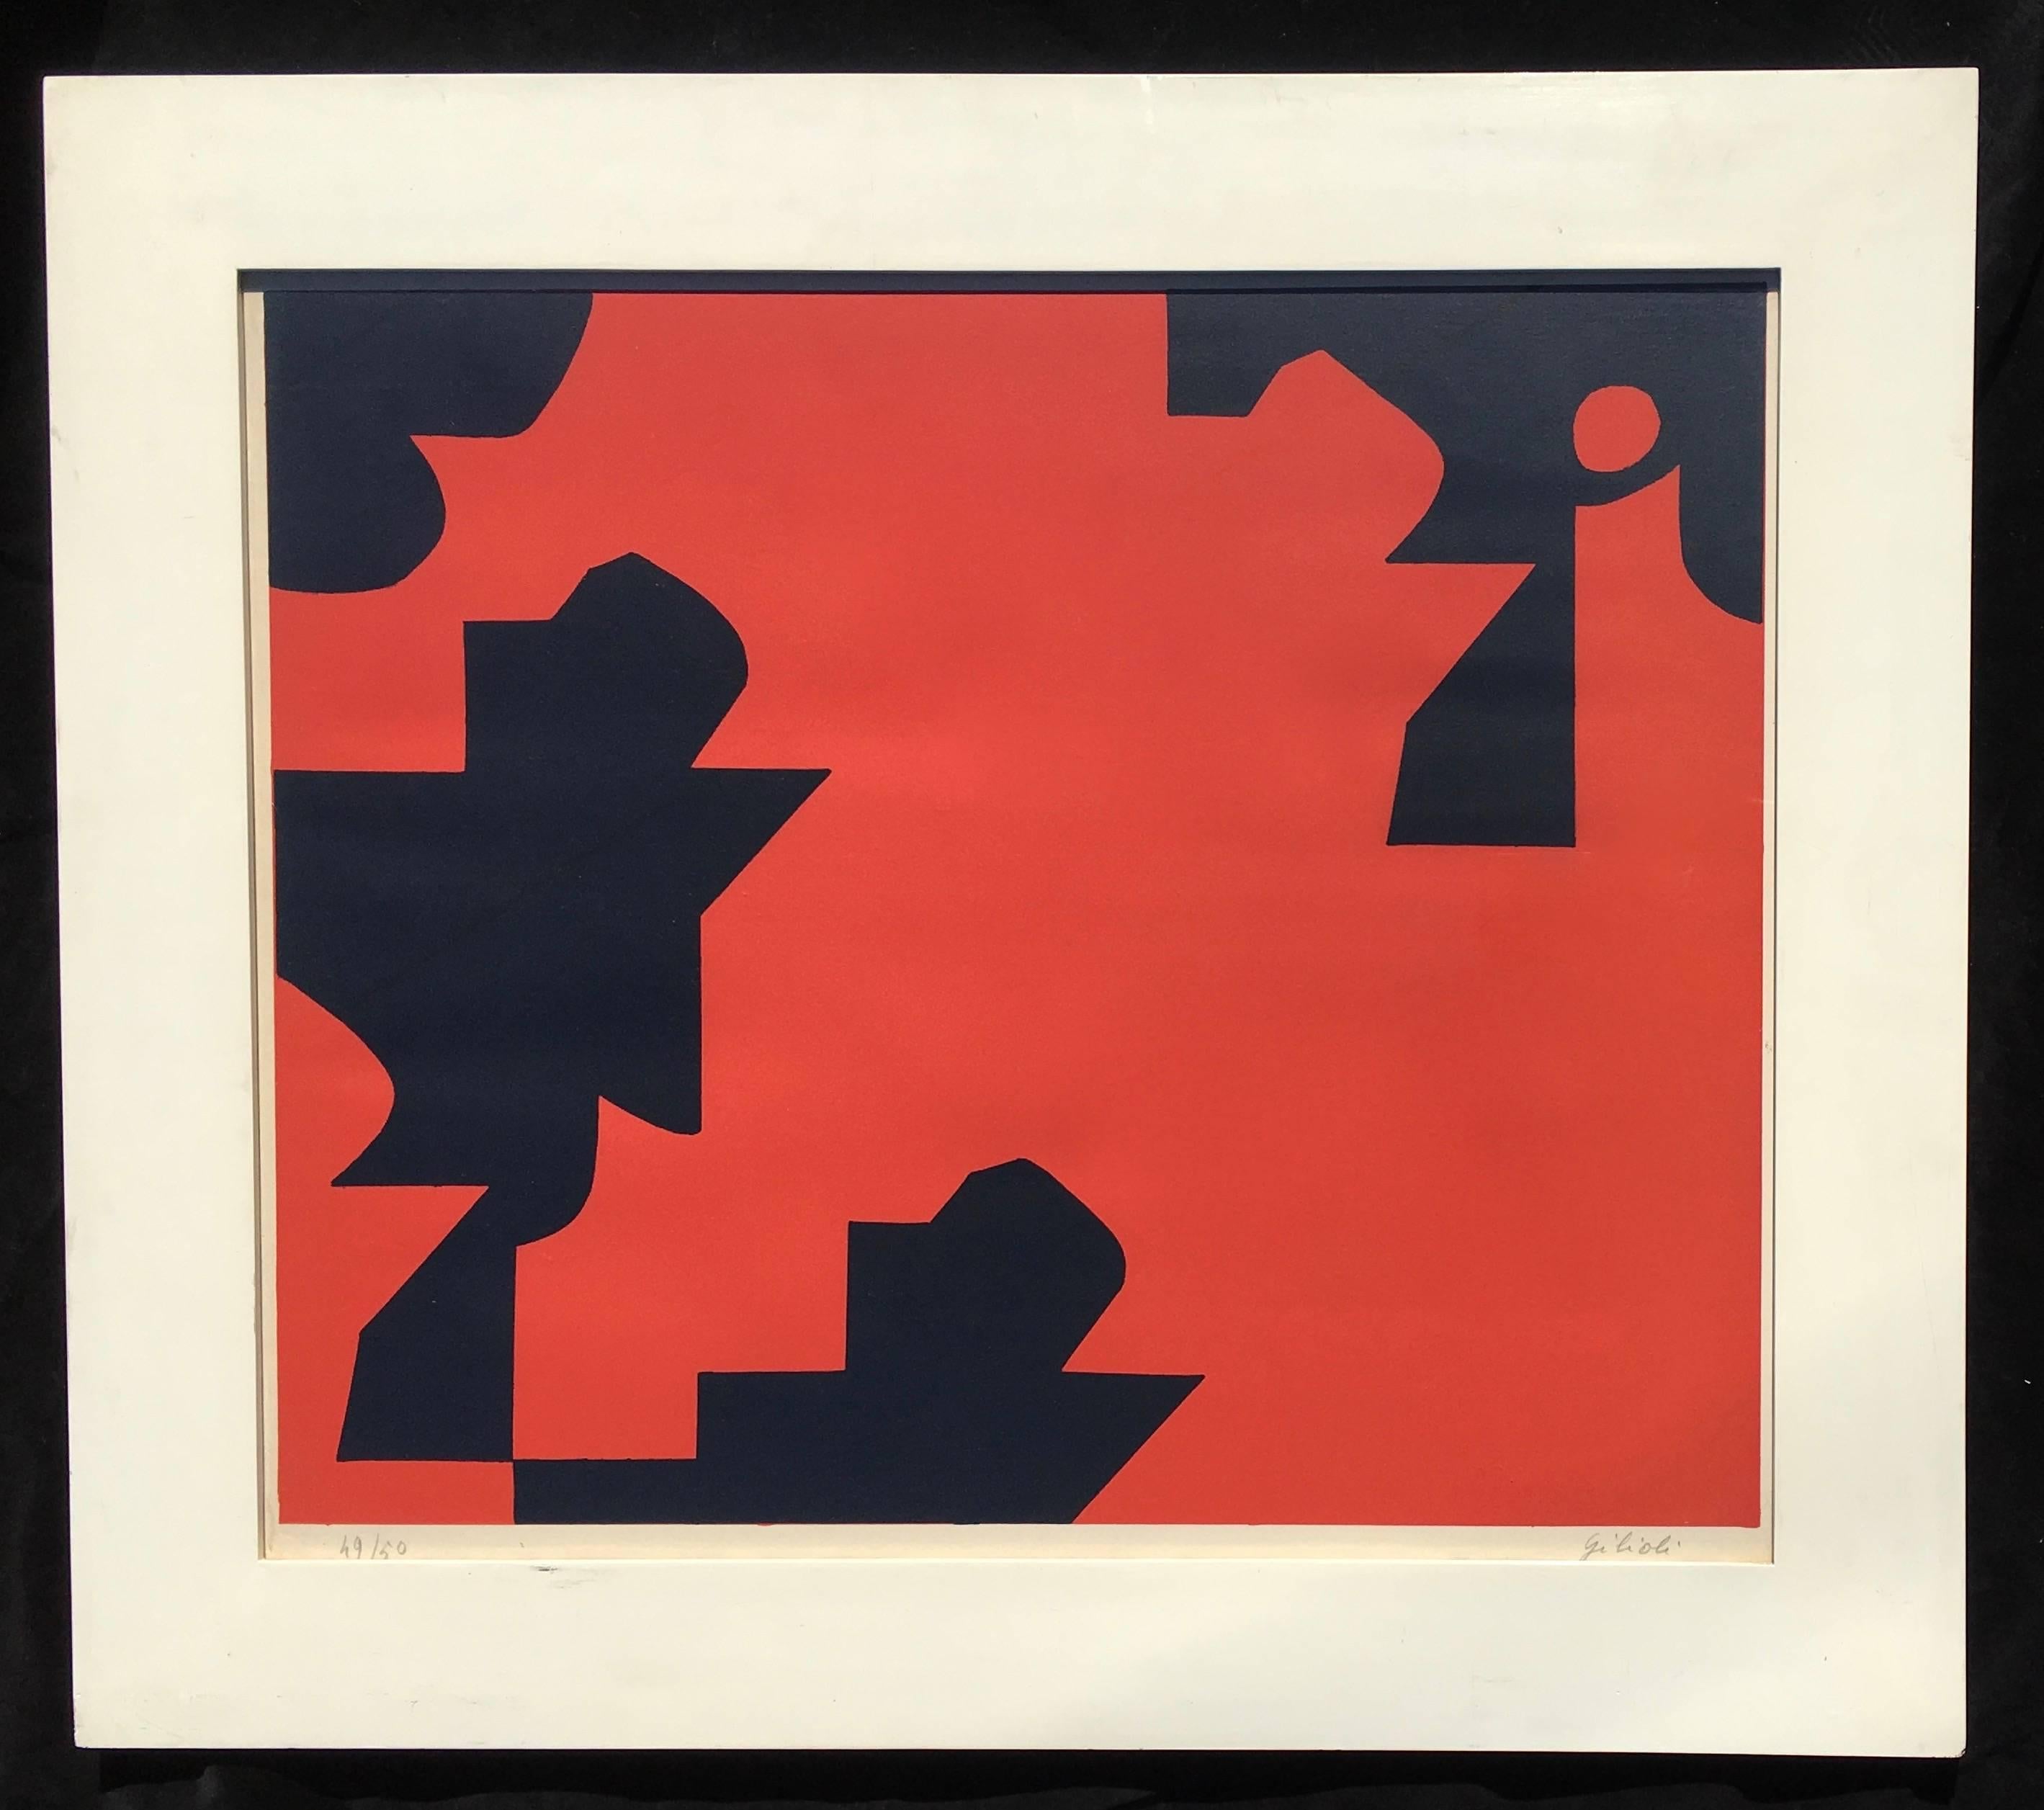 Emile Gilioli
Untitled abstraction,
circa 1970.
Lithograph on paper.
Image 19 1/4 x 23 1/4 inches.
Frame 26 x 30 inches.
Excellent condition.
Original frame.

Emile Gilioli (1911-1977) is a noted French sculptor of the post war period,